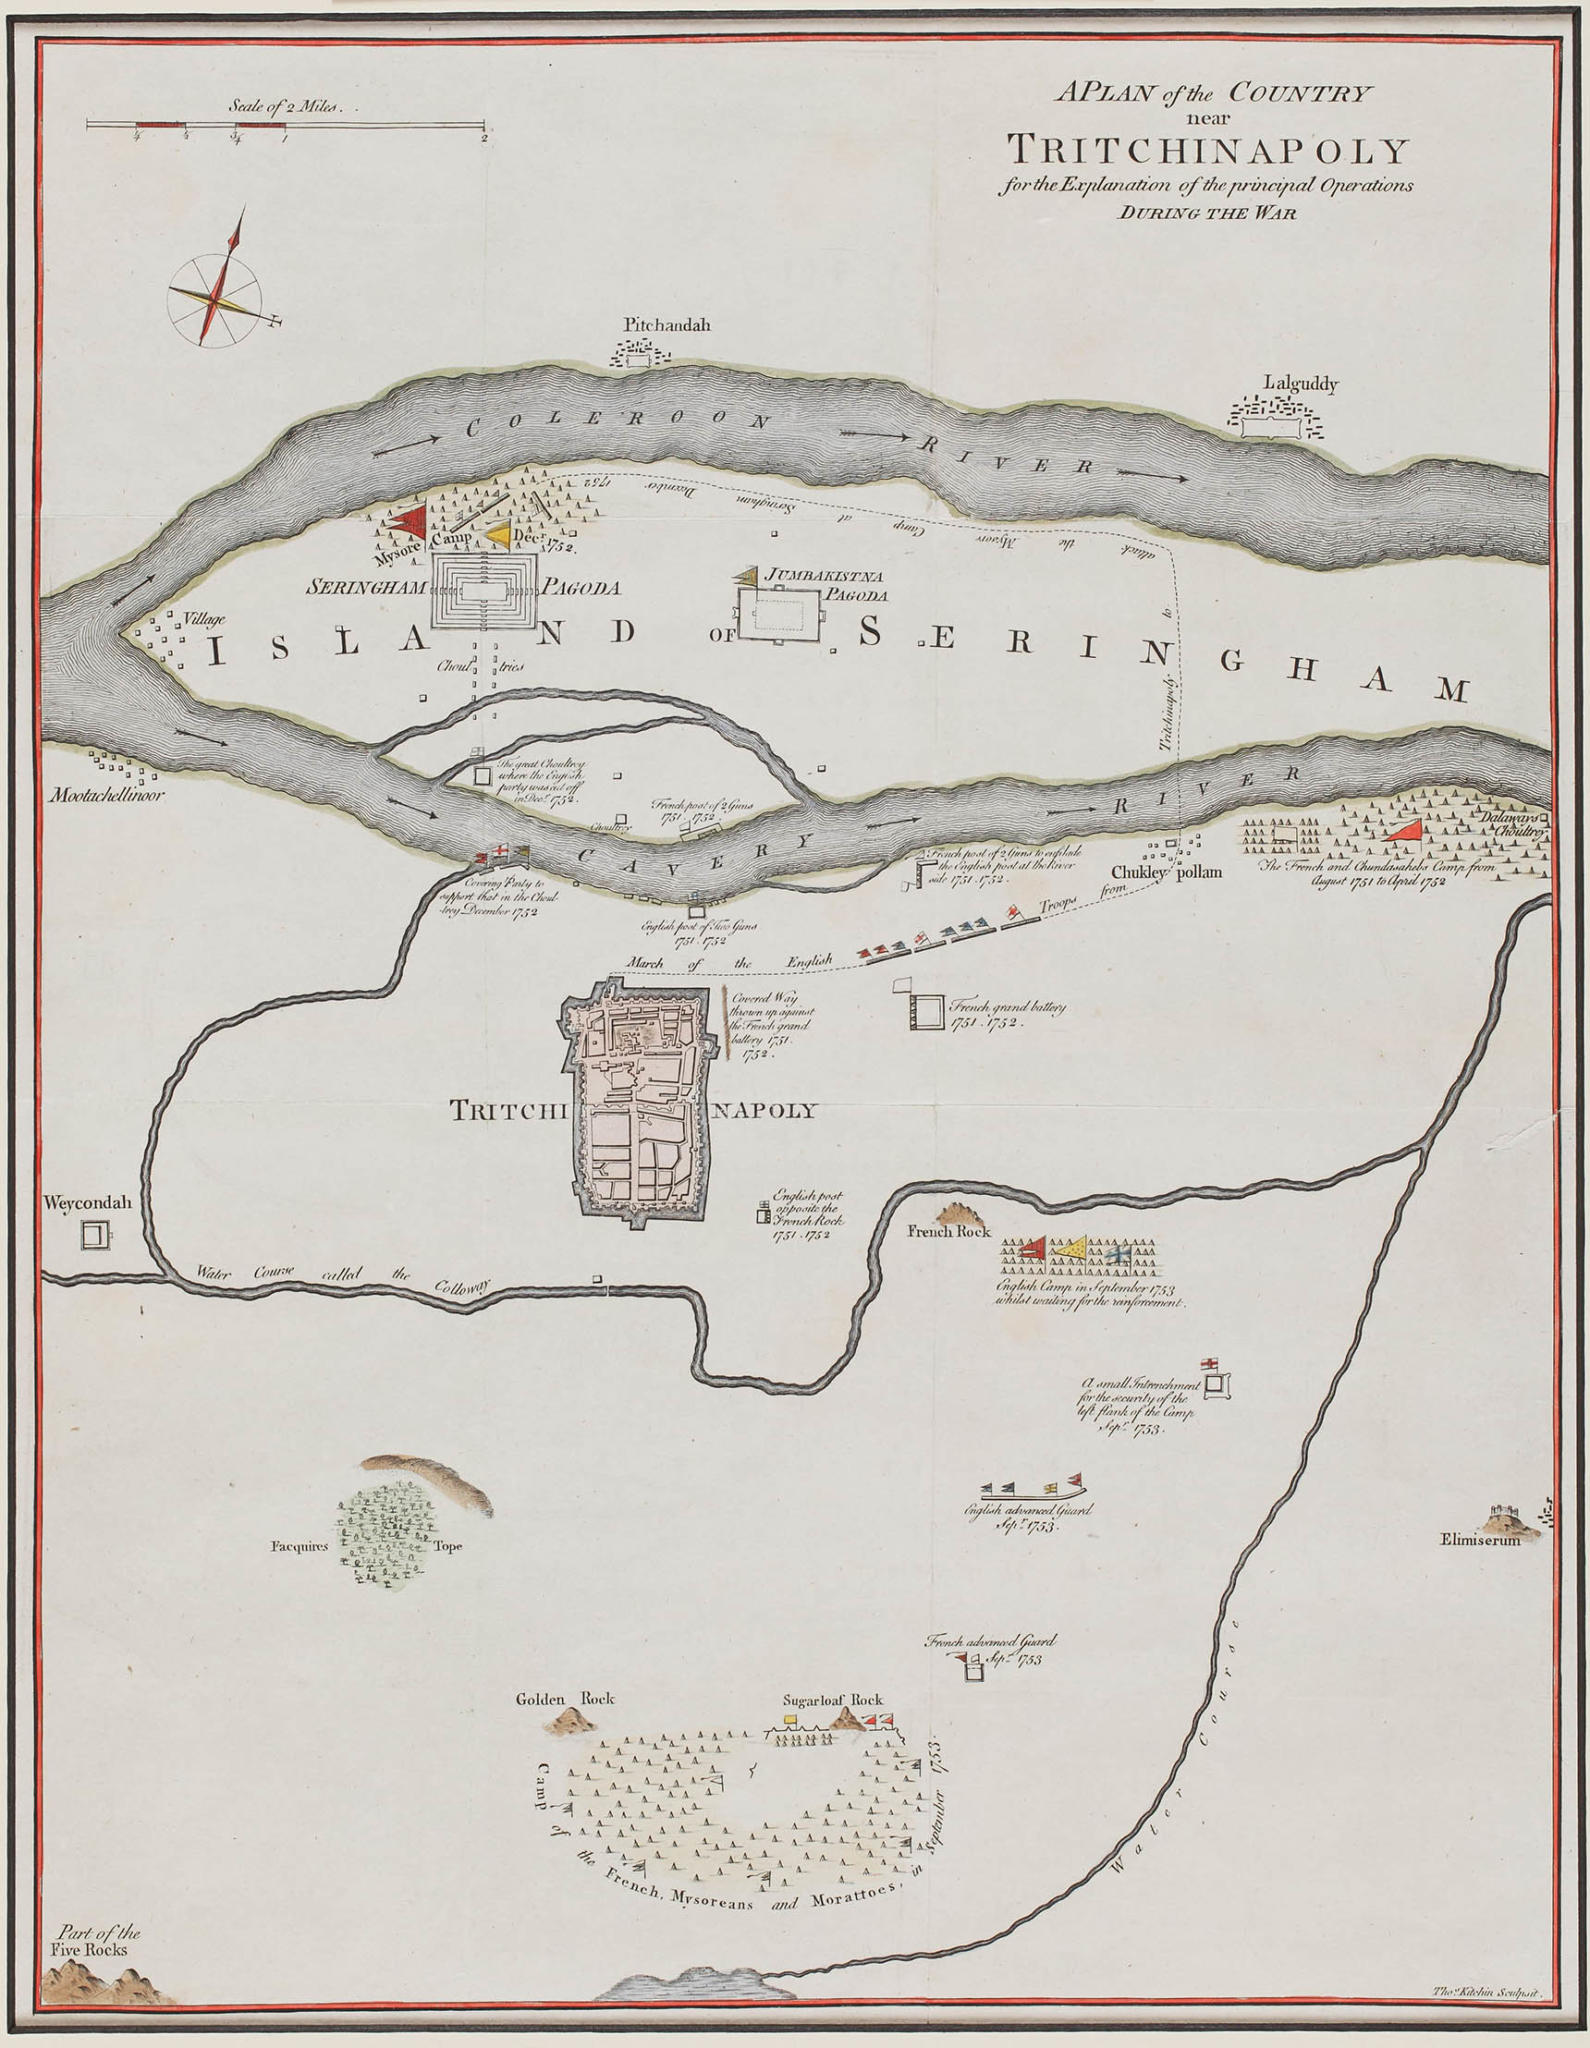 Early Indian Maps - Cartography, Indian Cartography, Indian maps, Maps, Shifting Selves